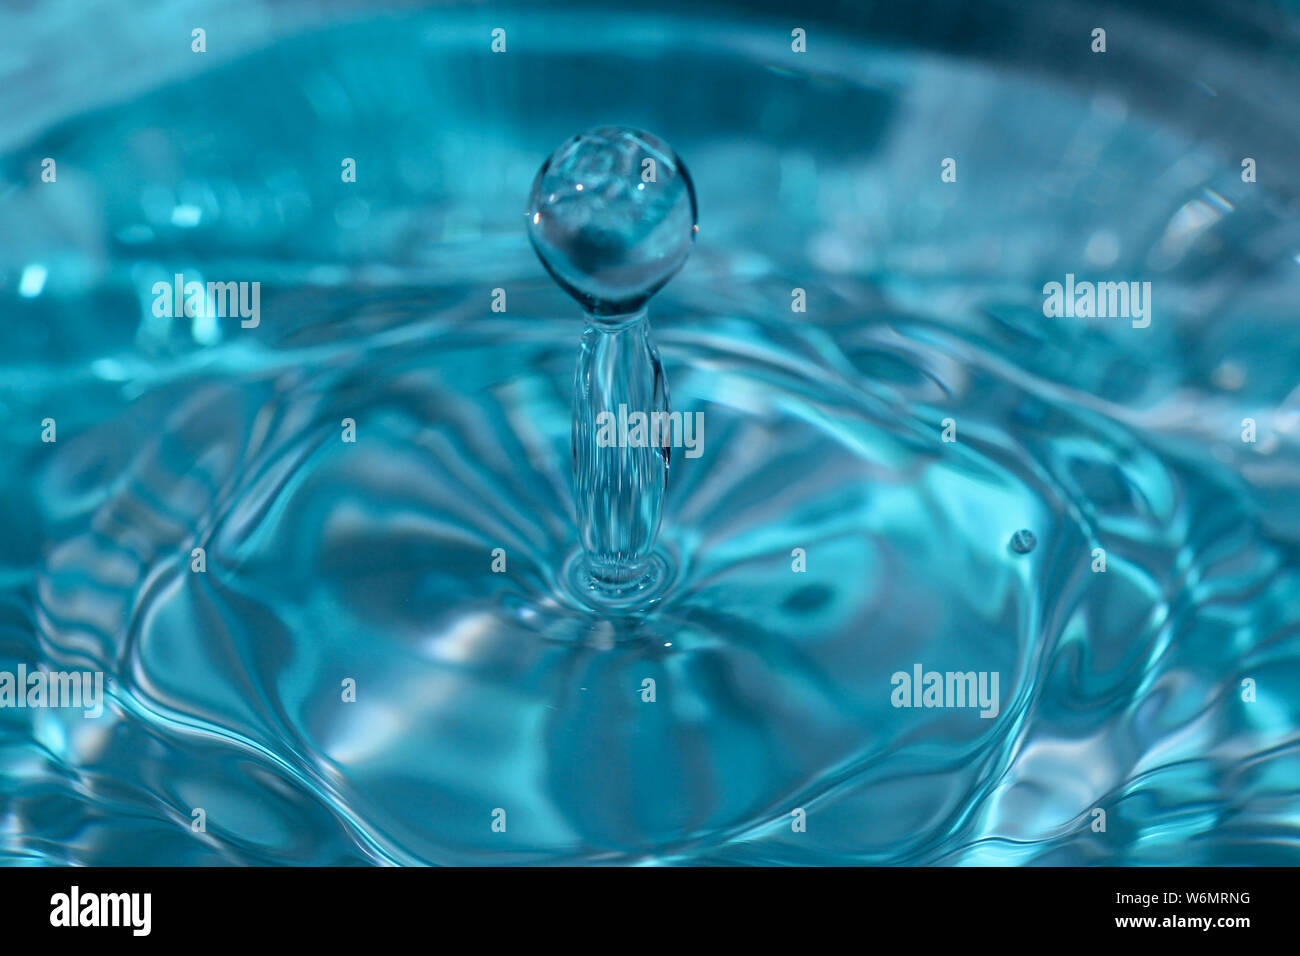 Texture Background With Falling Water Drops And Waves With Blue Water Stock Photo Alamy